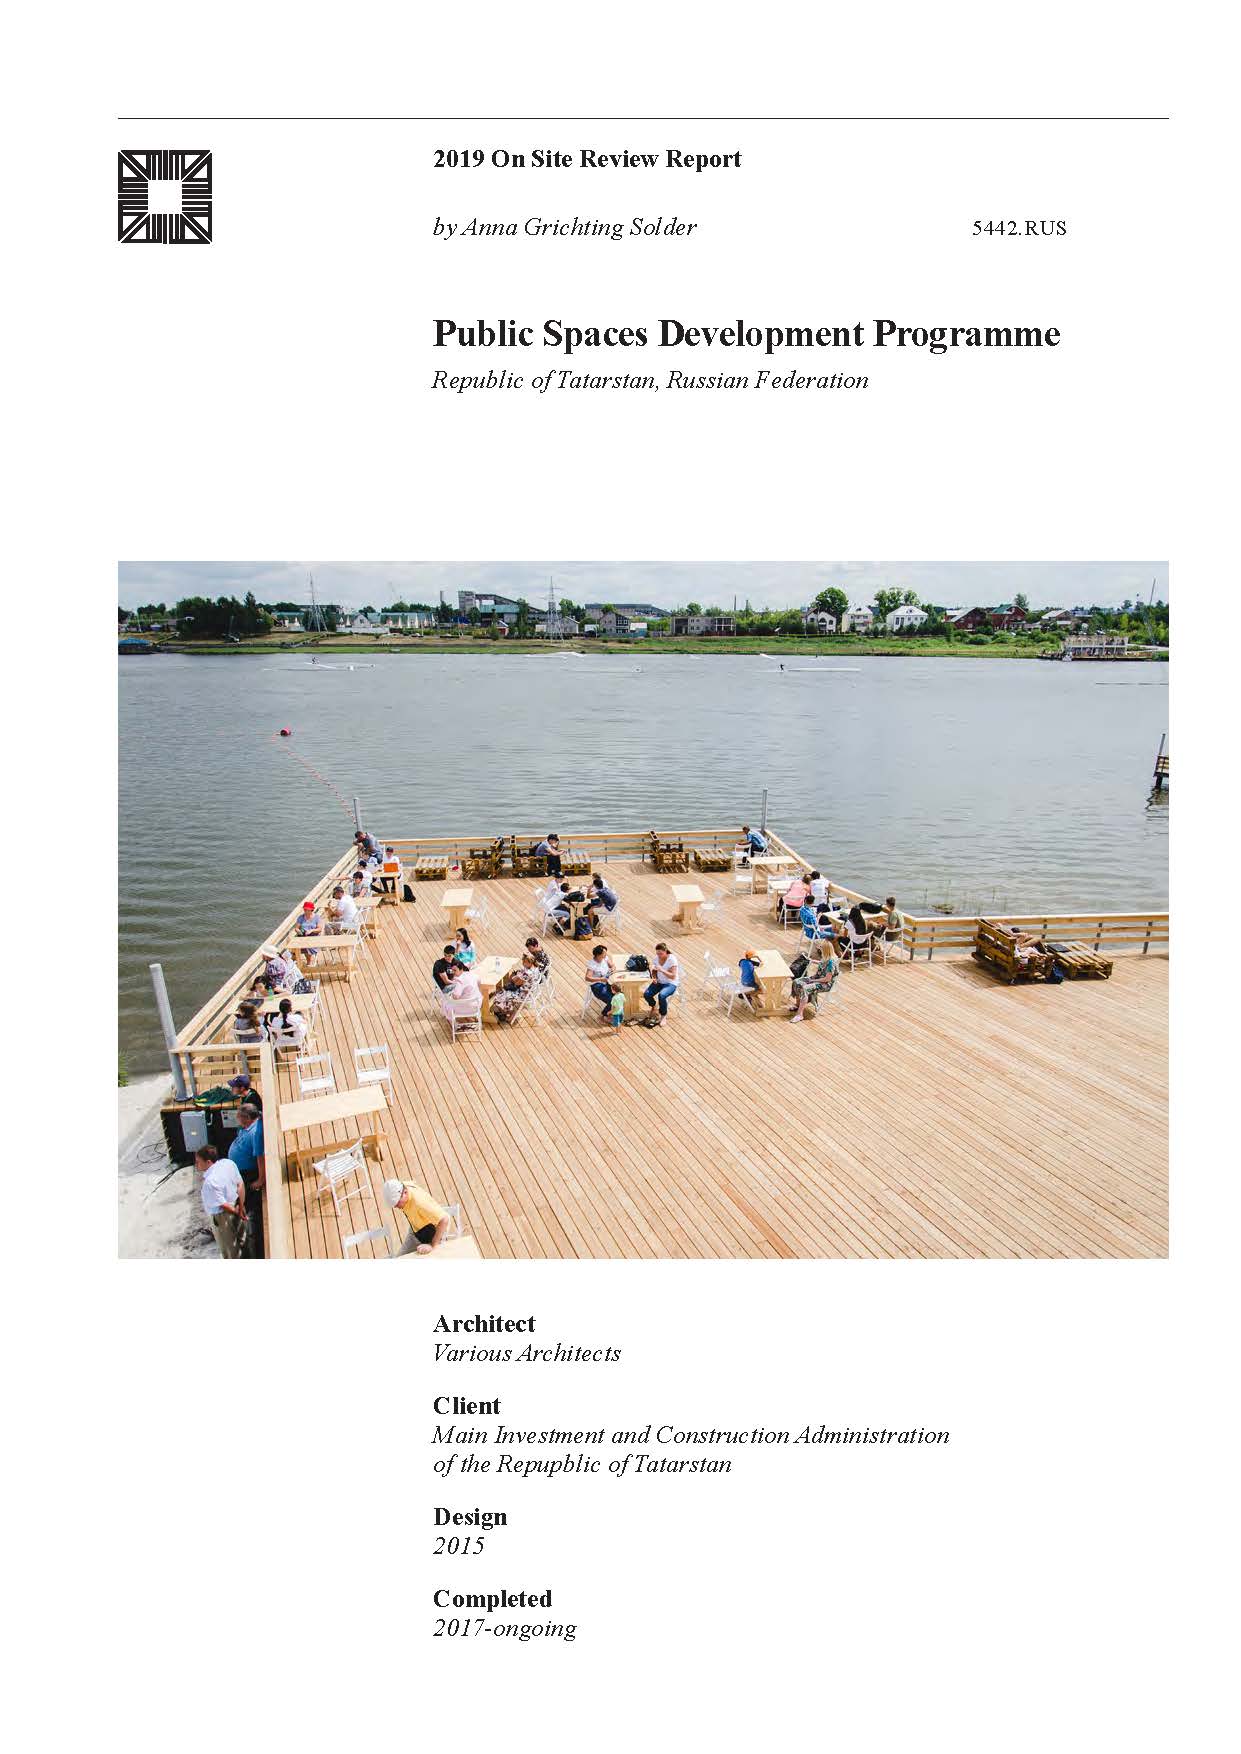 Public Spaces Development Programme - The On-site Review Report, formerly called the Technical Review, is a document prepared for the Aga Khan Award for Architecture by commissioned independent reviewers who report to the Master Jury about a specific shortlisted project. The reviewers are architectural professionals specialised in various disciplines, including housing, urban planning, landscape design, and restoration. Their task is to examine, on-site, the shortlisted projects to verify project data seek. The reviewers must consider a detailed set of criteria in their written reports, and must also respond to the specific concerns and questions prepared by the Master Jury for each project. This process is intensive and exhaustive making the Aga Khan Award process entirely unique.